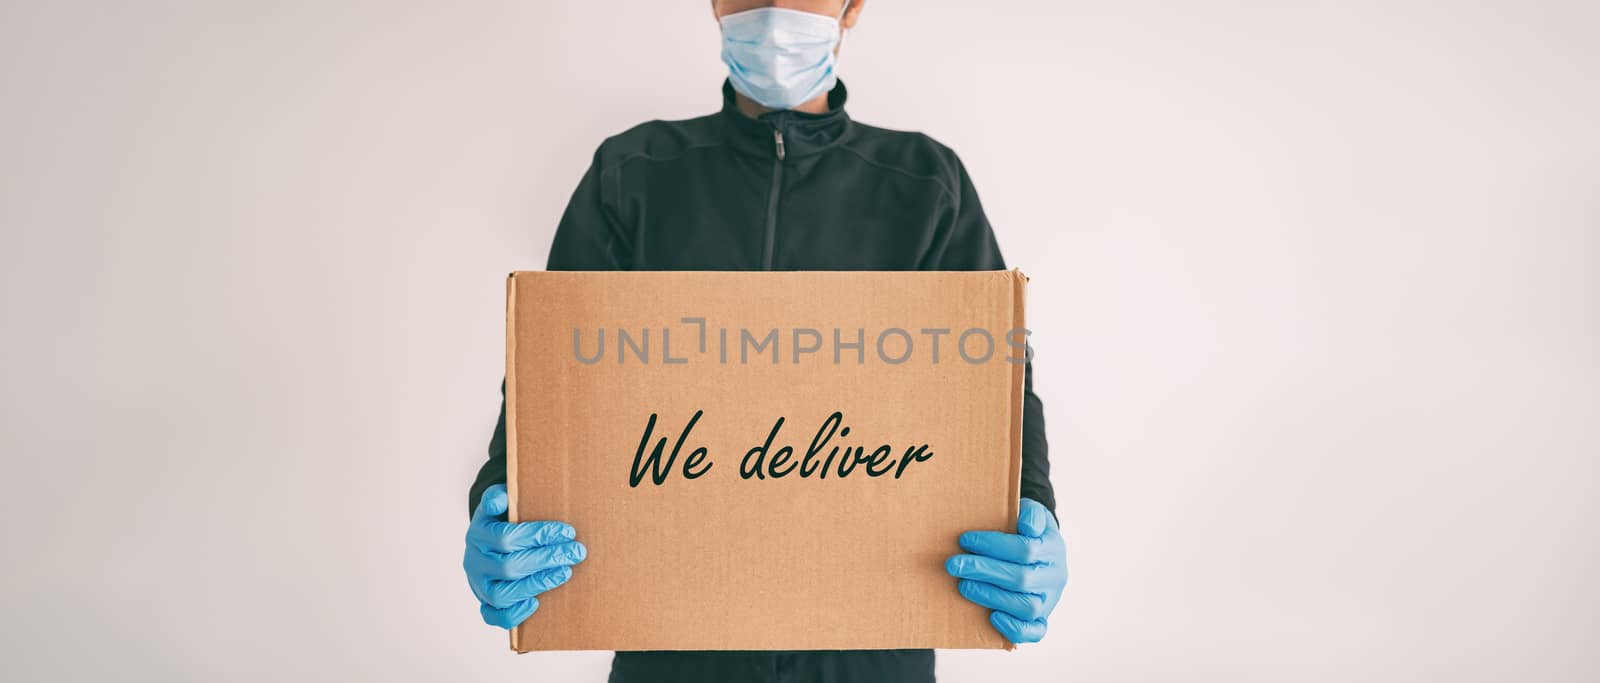 Home delivery WE DELIVER sign on cardboard box banner. Food grocery package online shopping man delivering with gloves and mask for COVID-19 coronavirus social distancing carrying at door.